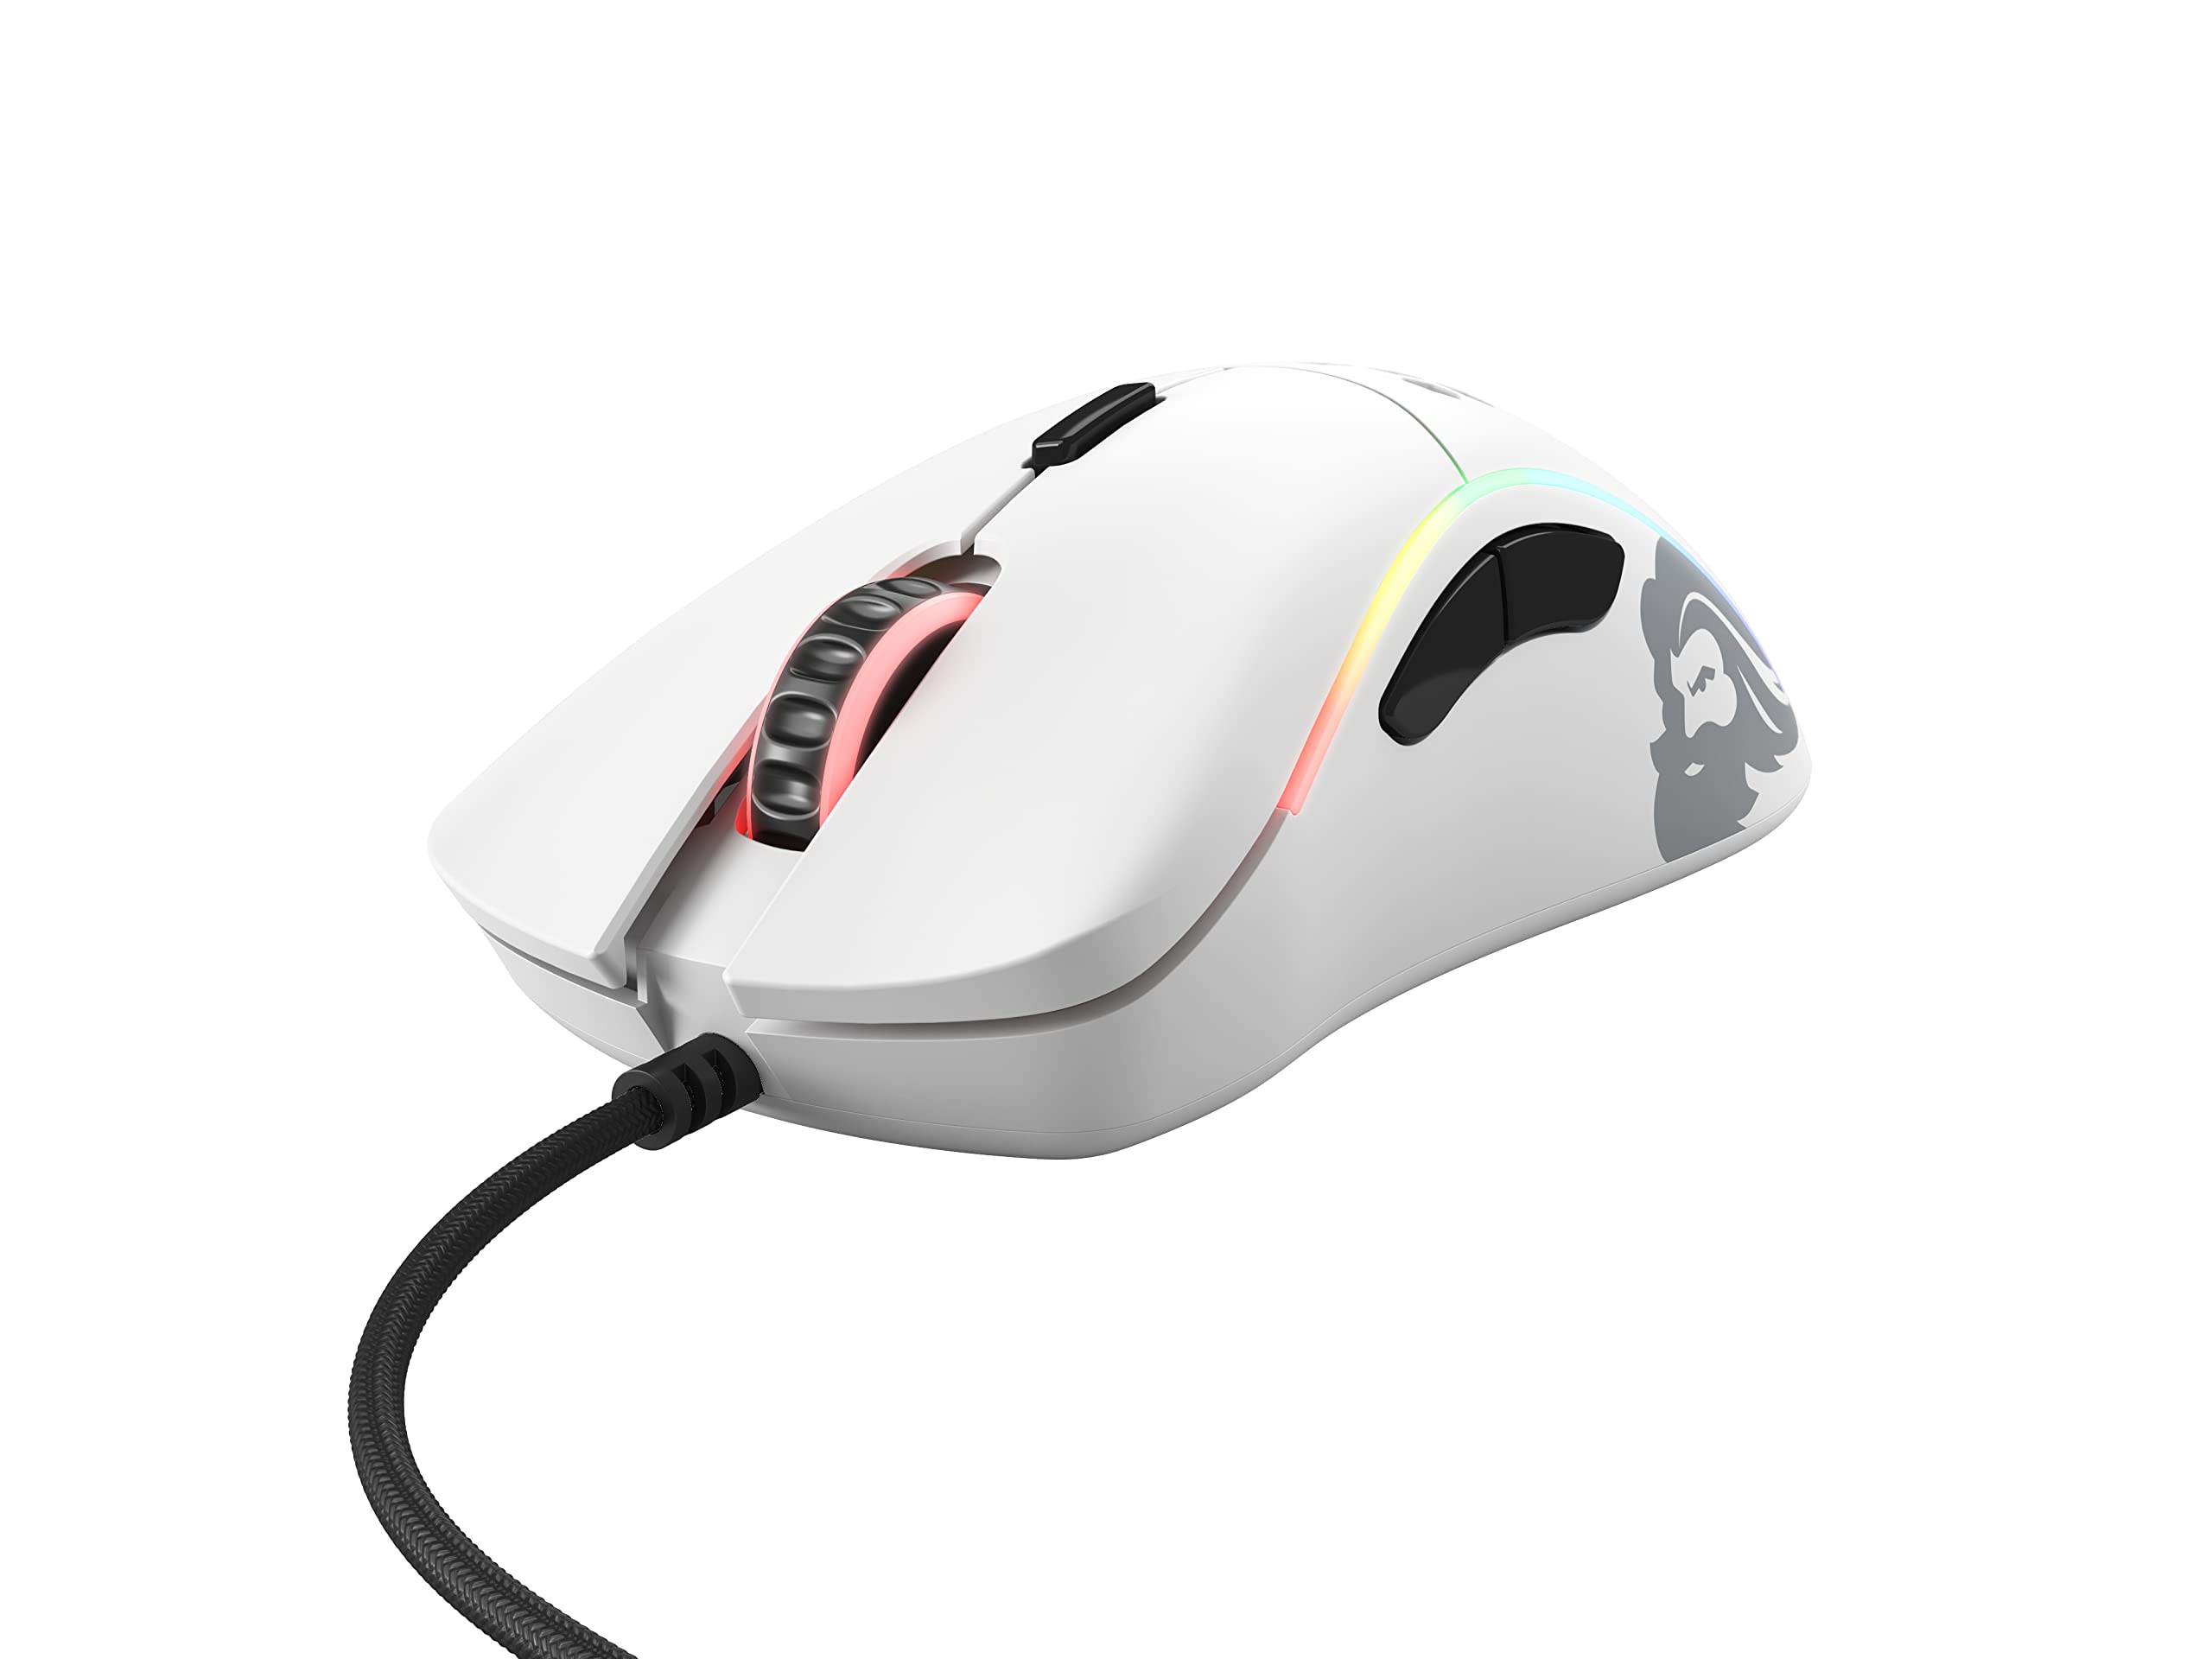 Glorious Gaming Mouse - Glorious Model D Honeycomb Mouse - Superlight RGB PC Mouse - 68 g - Matte White Wired Mouse